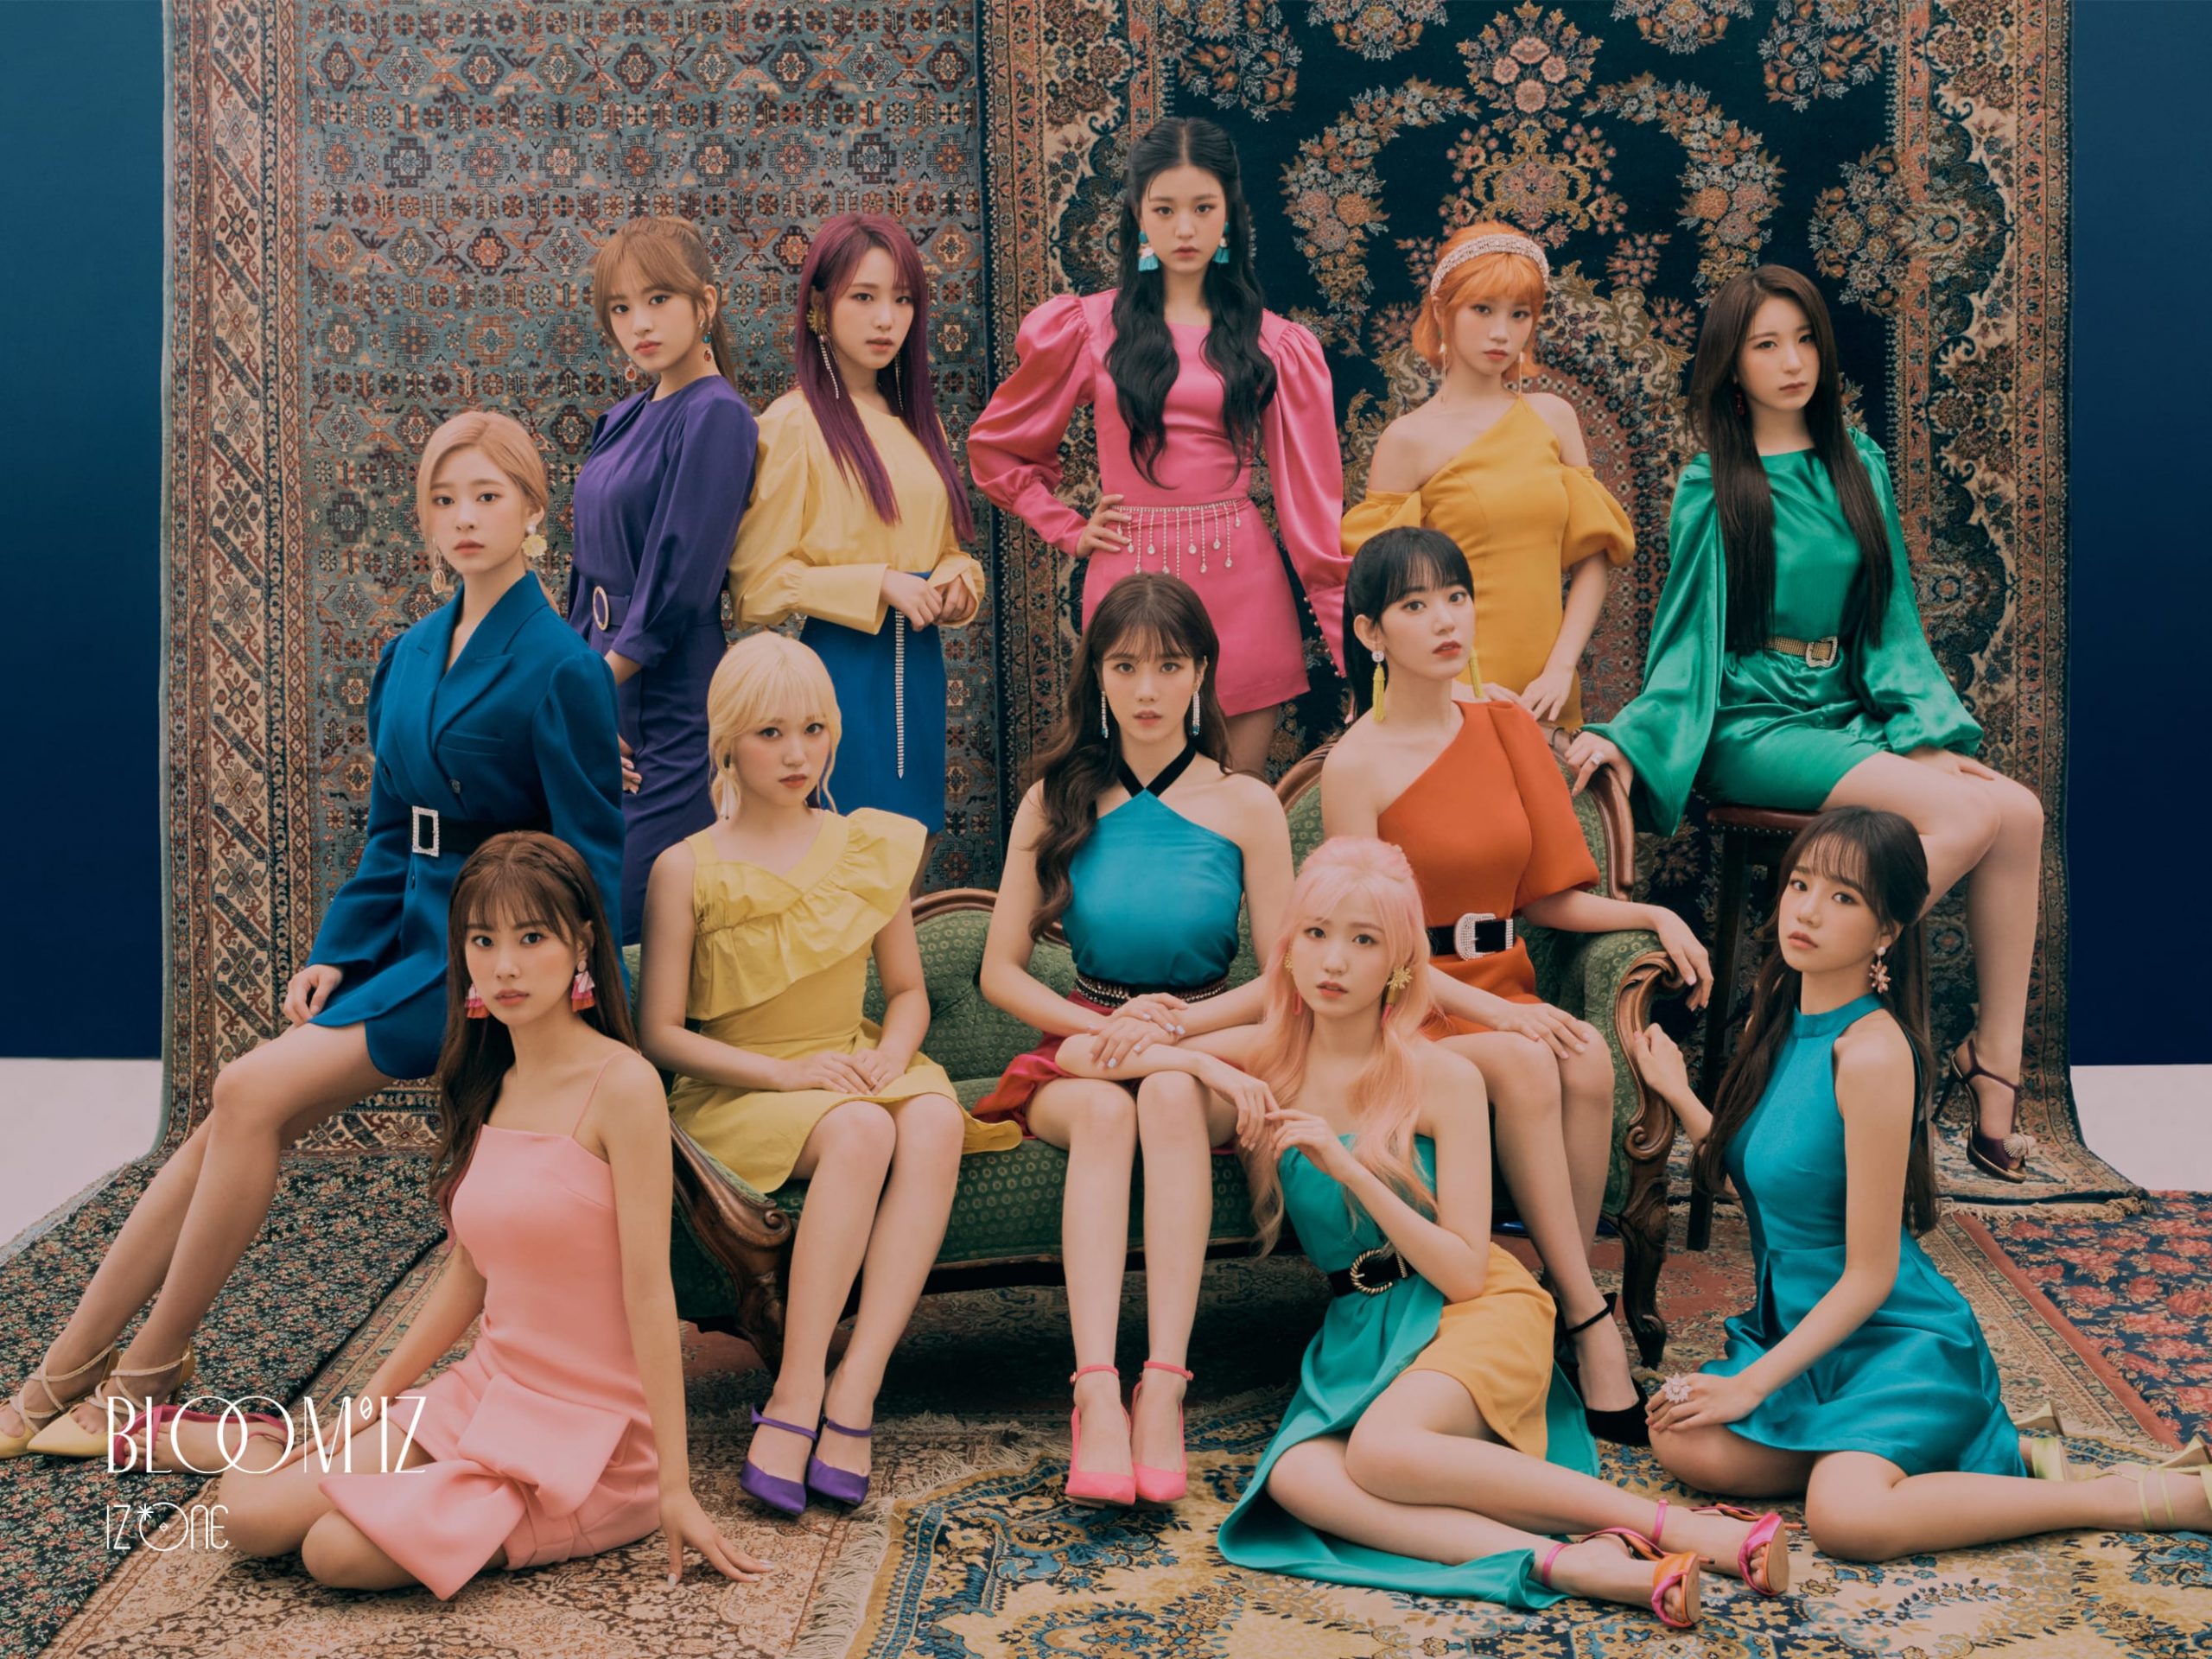 This is a picture of IZ*ONE